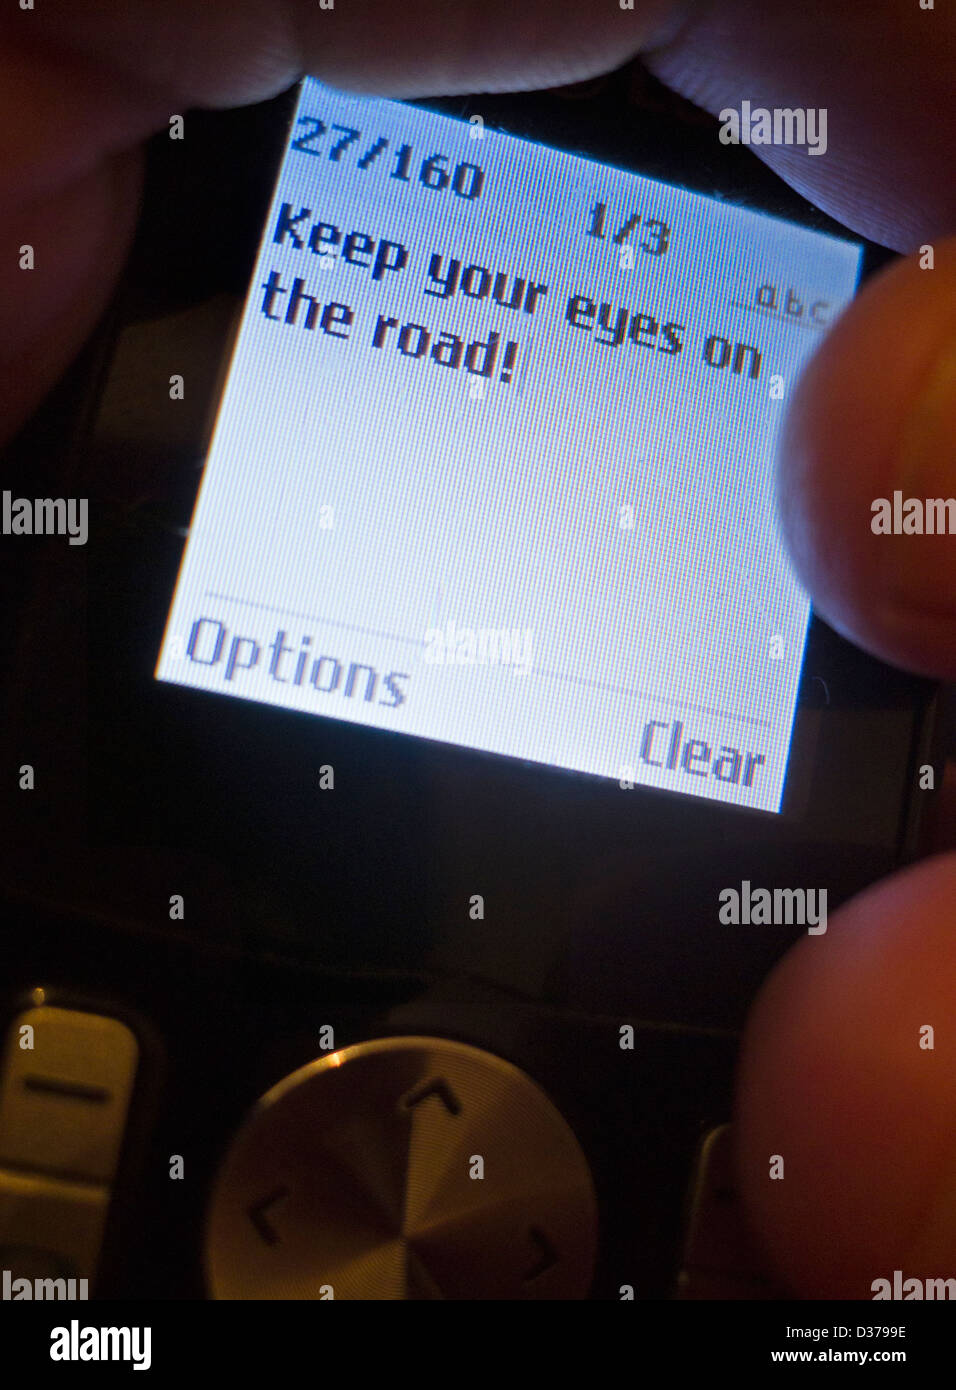 Text message 'Keep your eyes on the road!' on a mobile phone in the hand of a male driver. Stock Photo